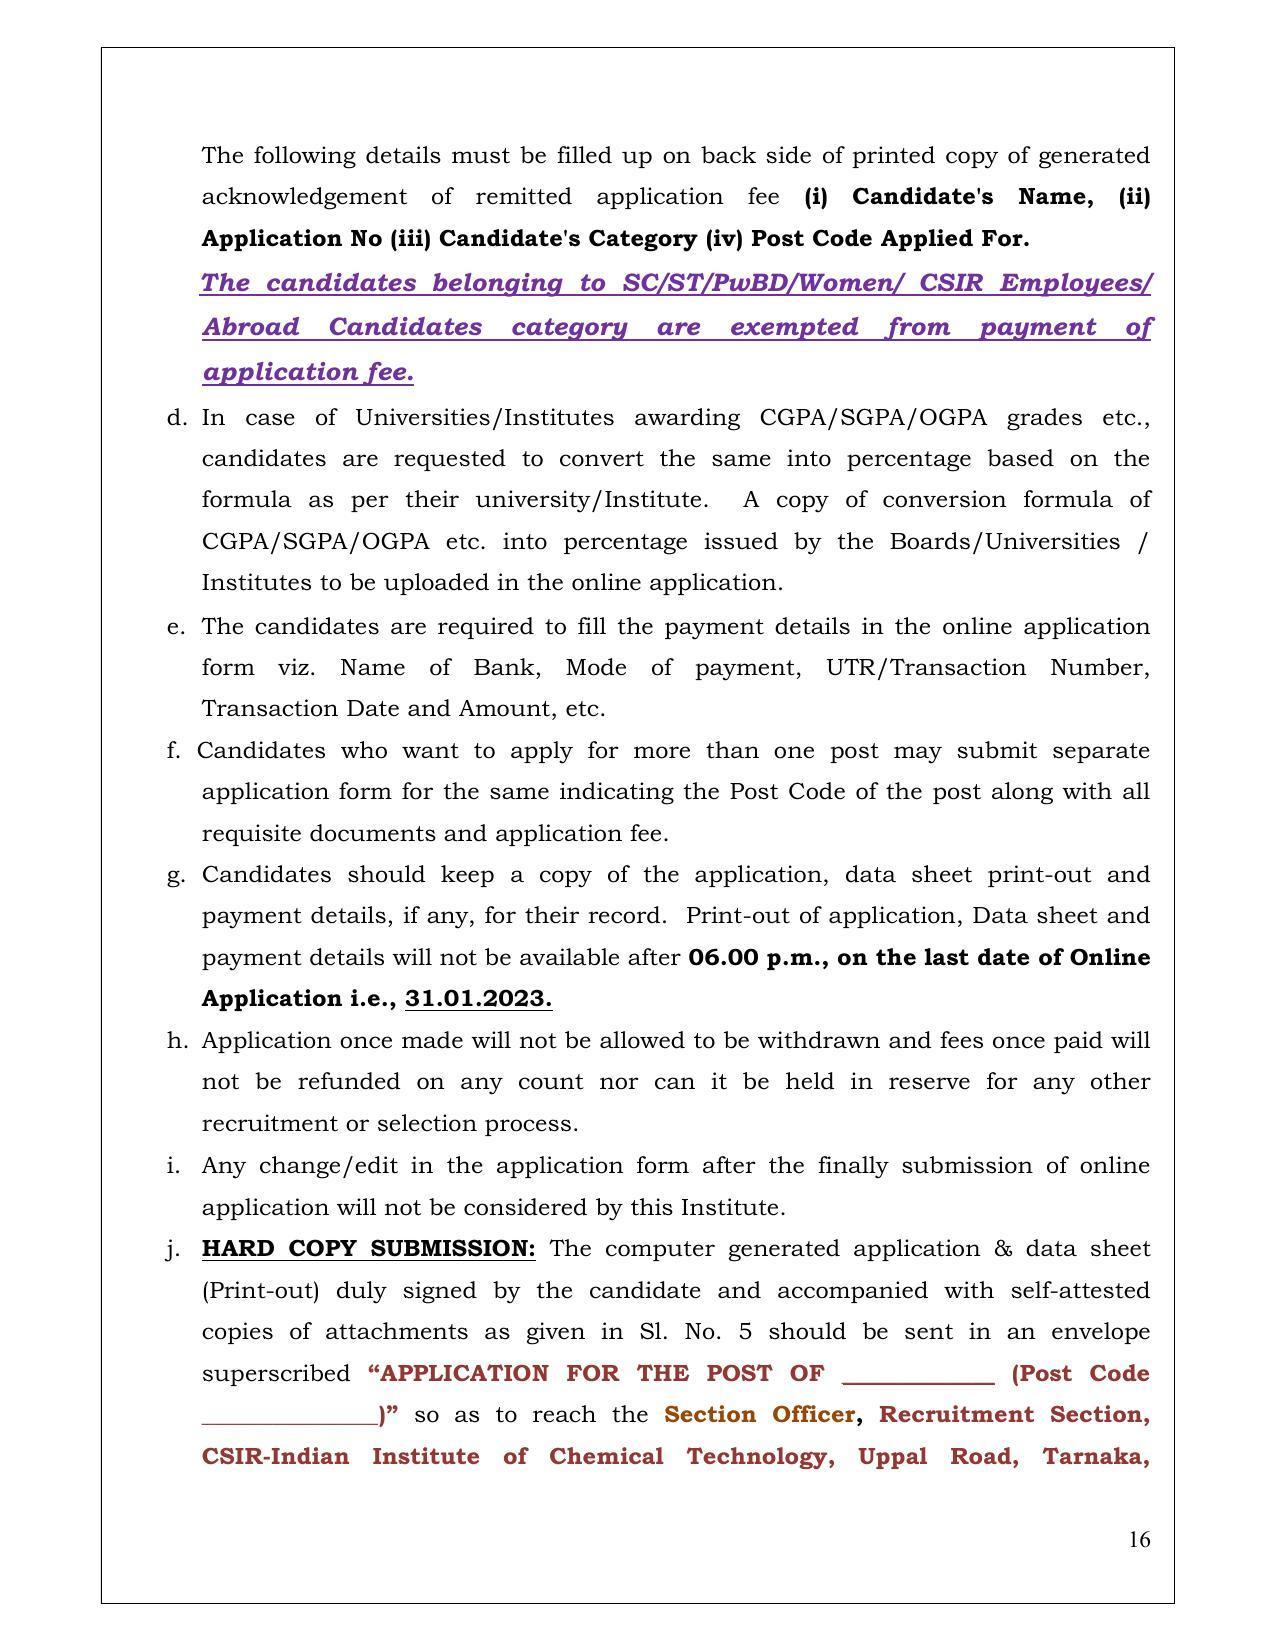 Indian Institute of Chemical Technology (IICT) Invites Application for 20 Scientist, Senior Scientist, Principal Scientist Recruitment 2023 - Page 2